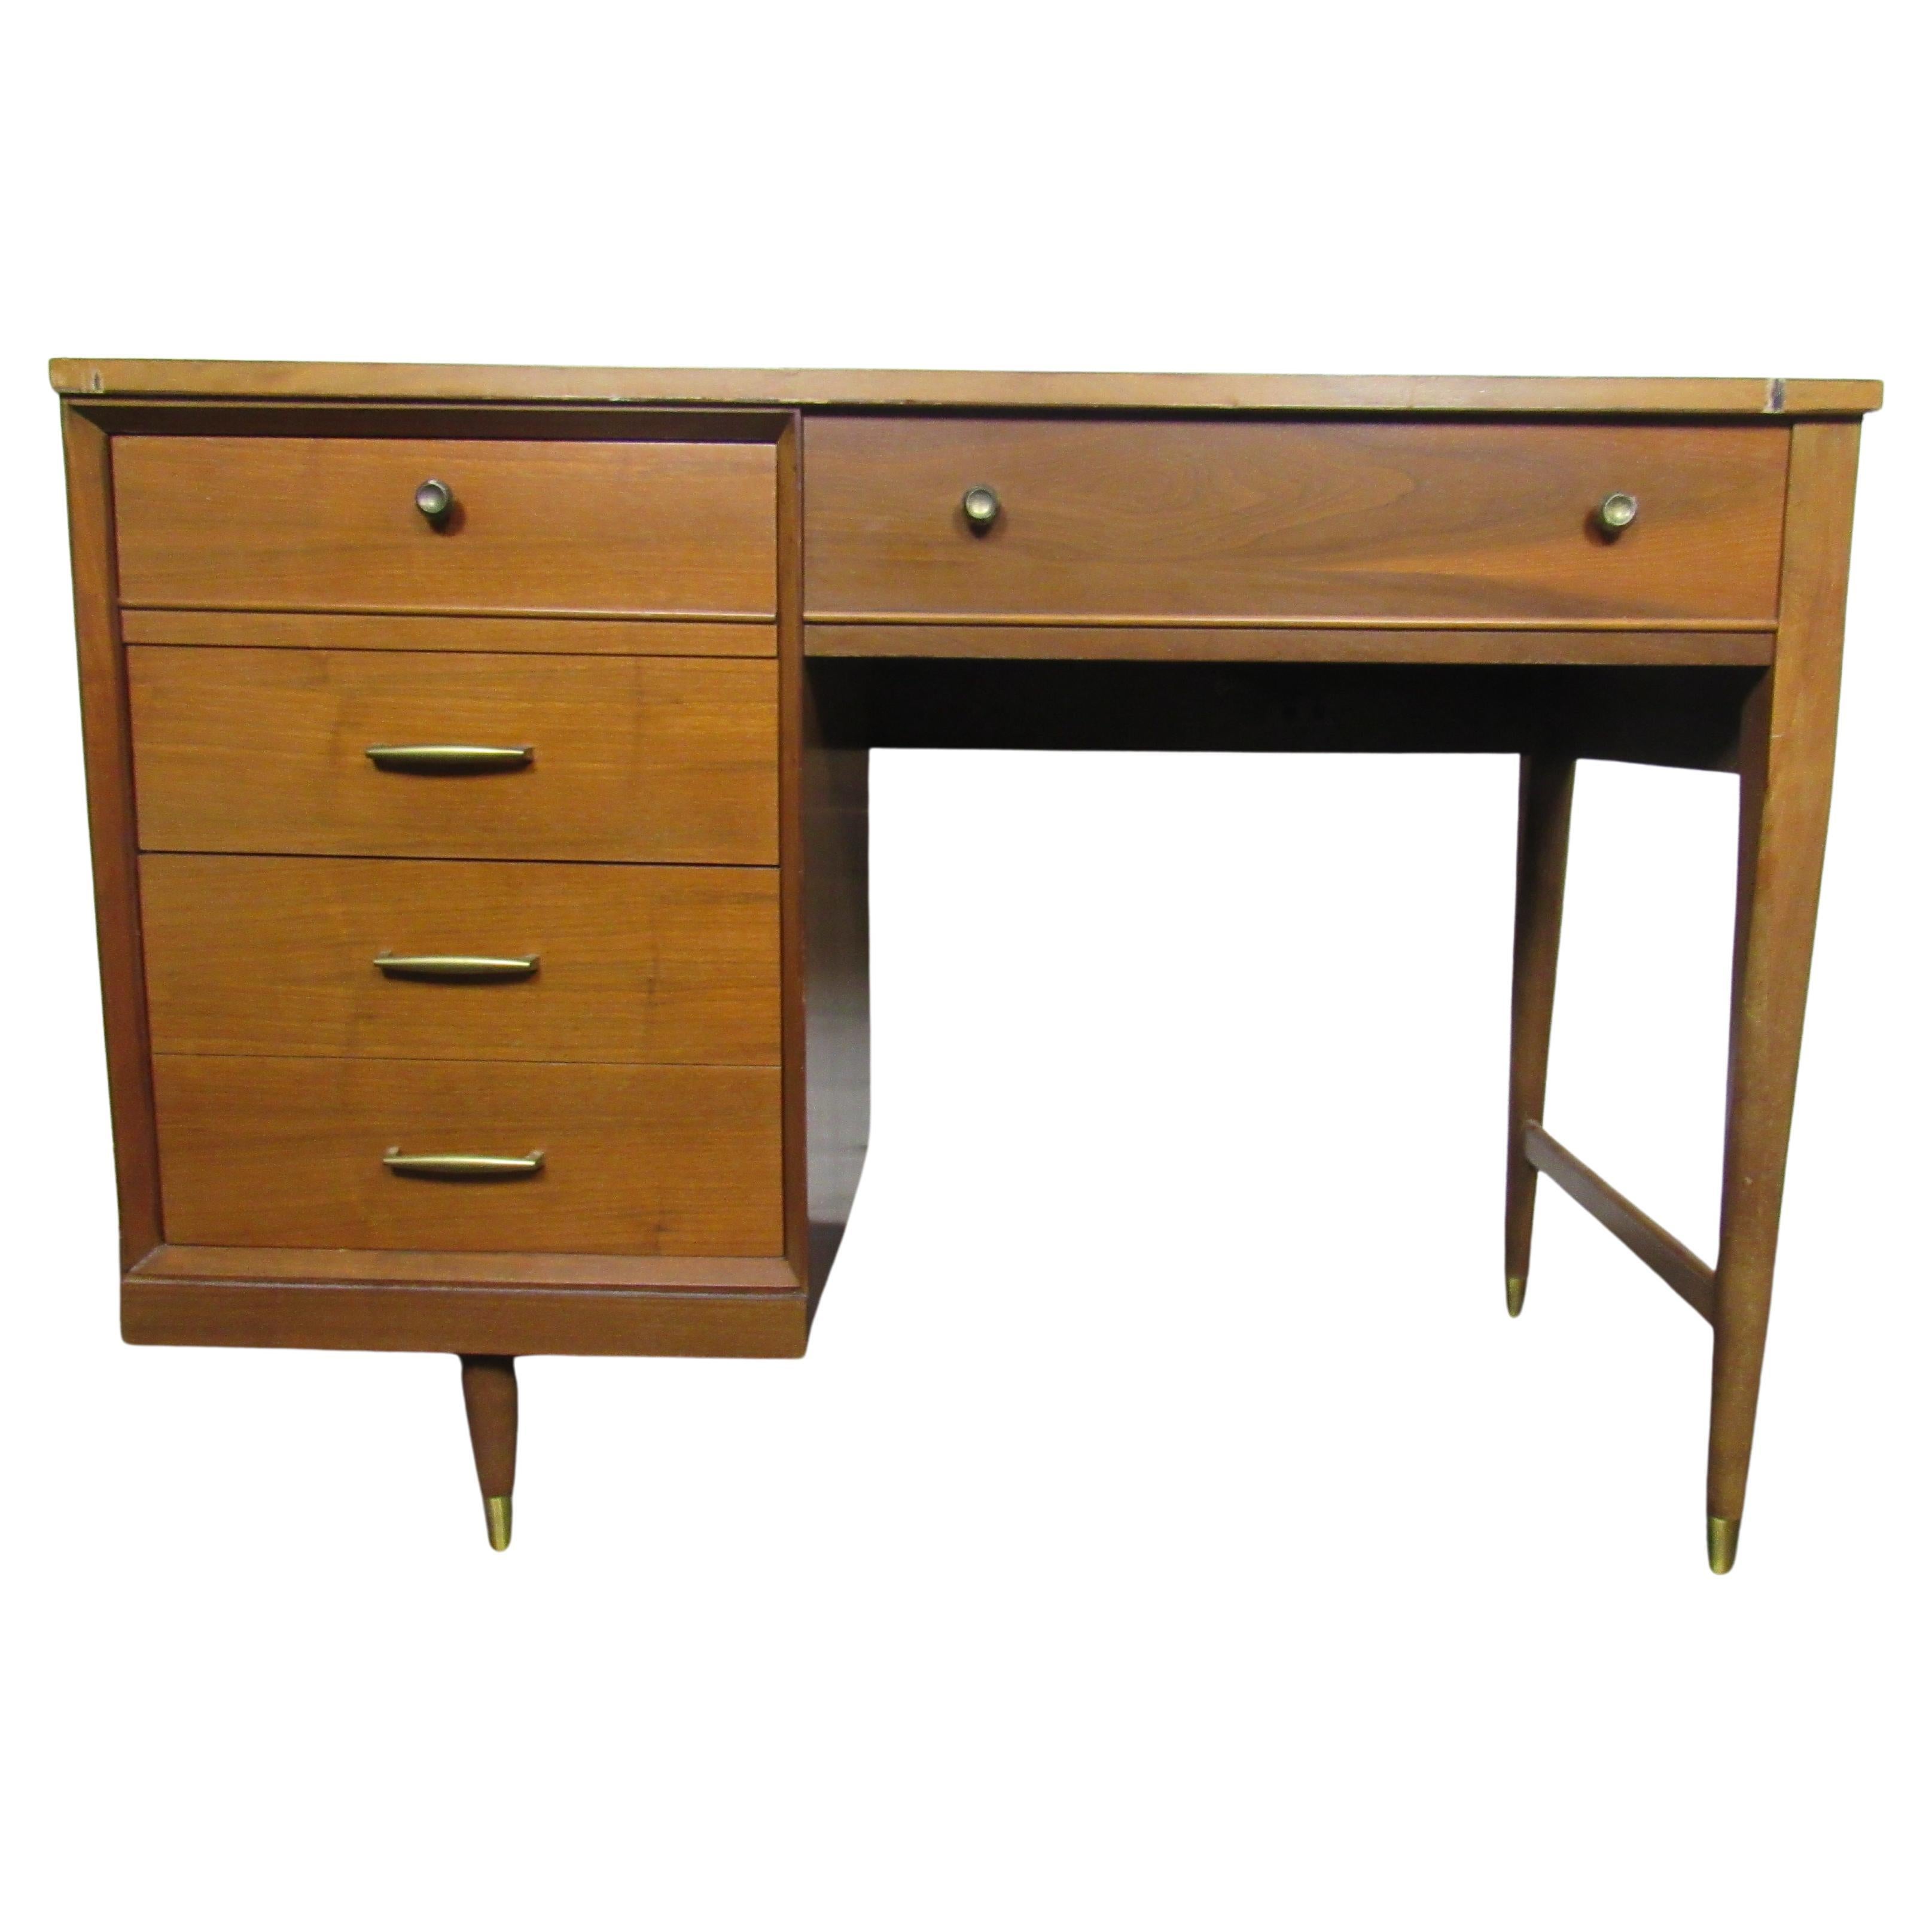 This vintage writing desk includes a protective cover for part of the top surface, multiple drawers for storage, and brass accents. Please confirm item location with seller (NY/NJ).